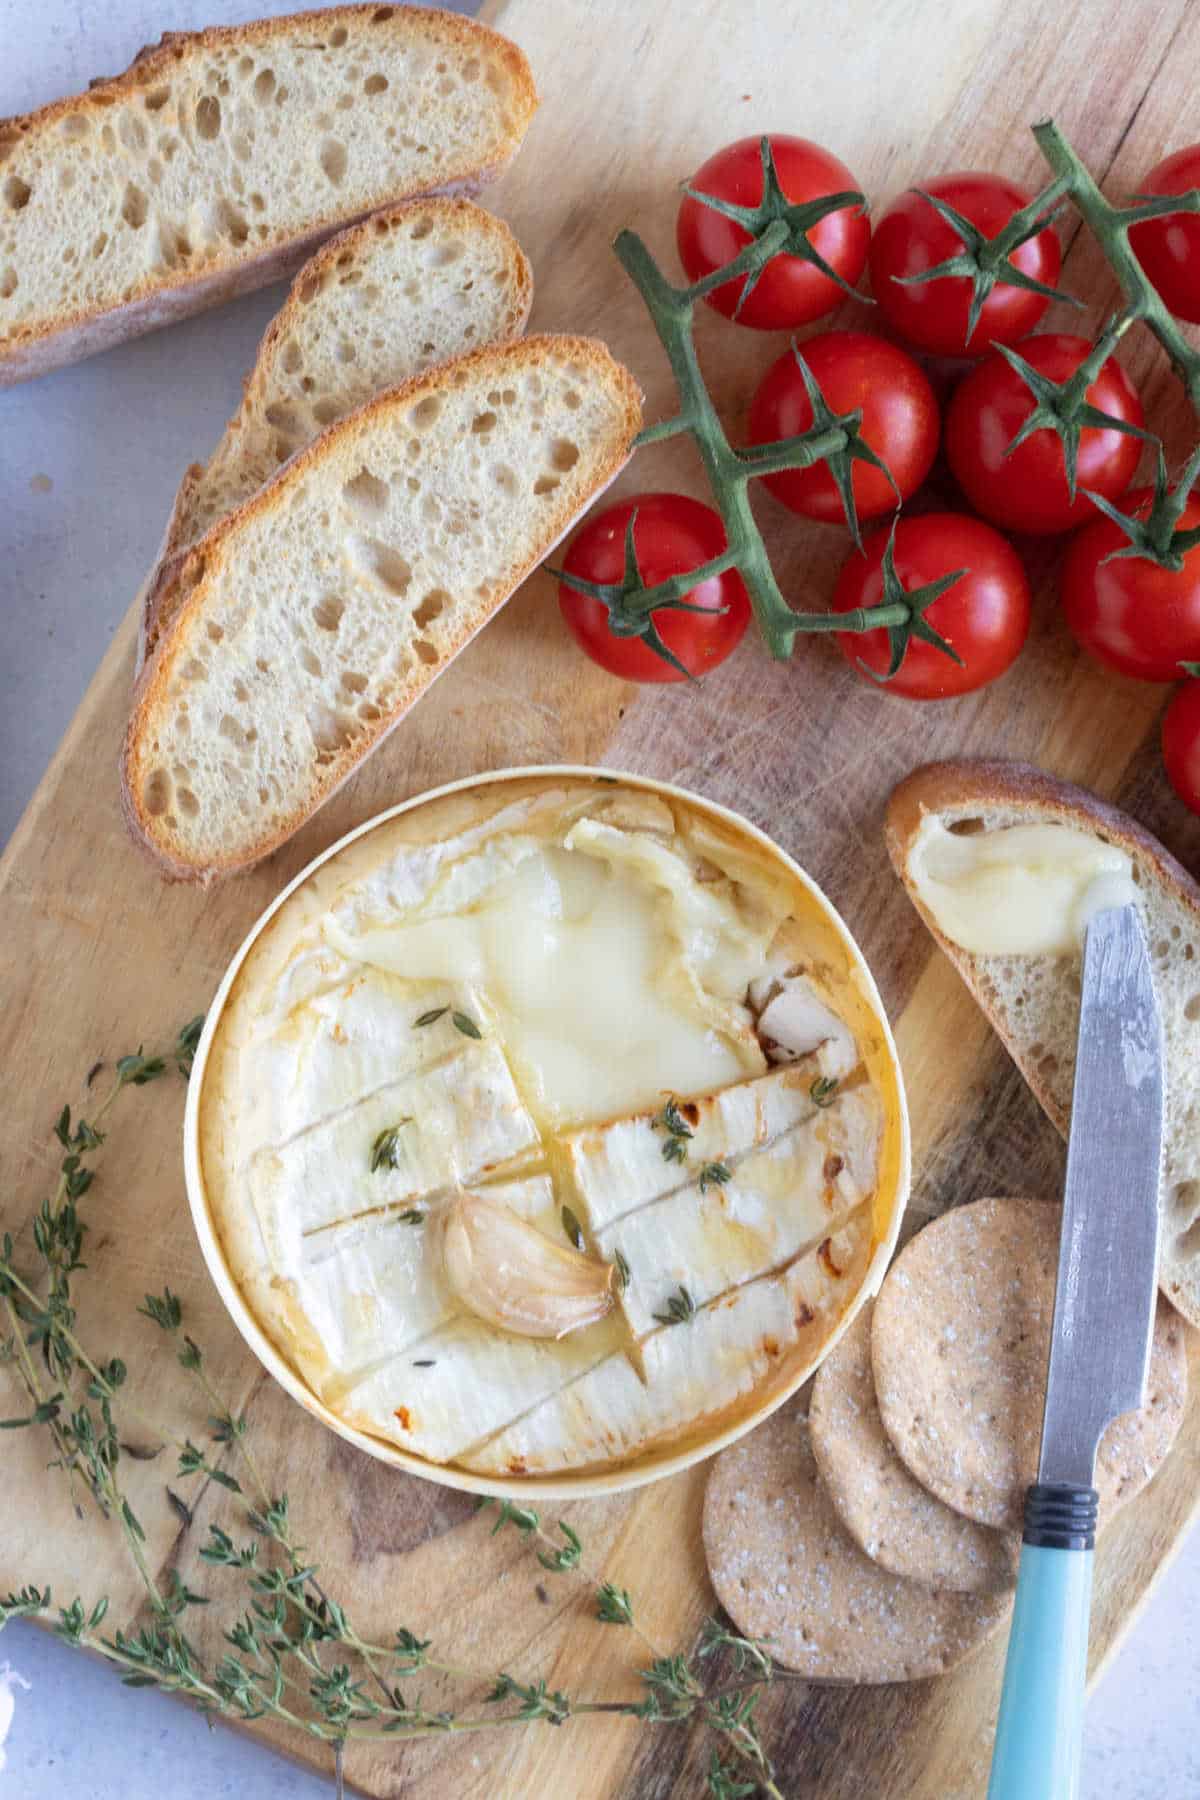 Baked camembert with thyme leaves and honey.